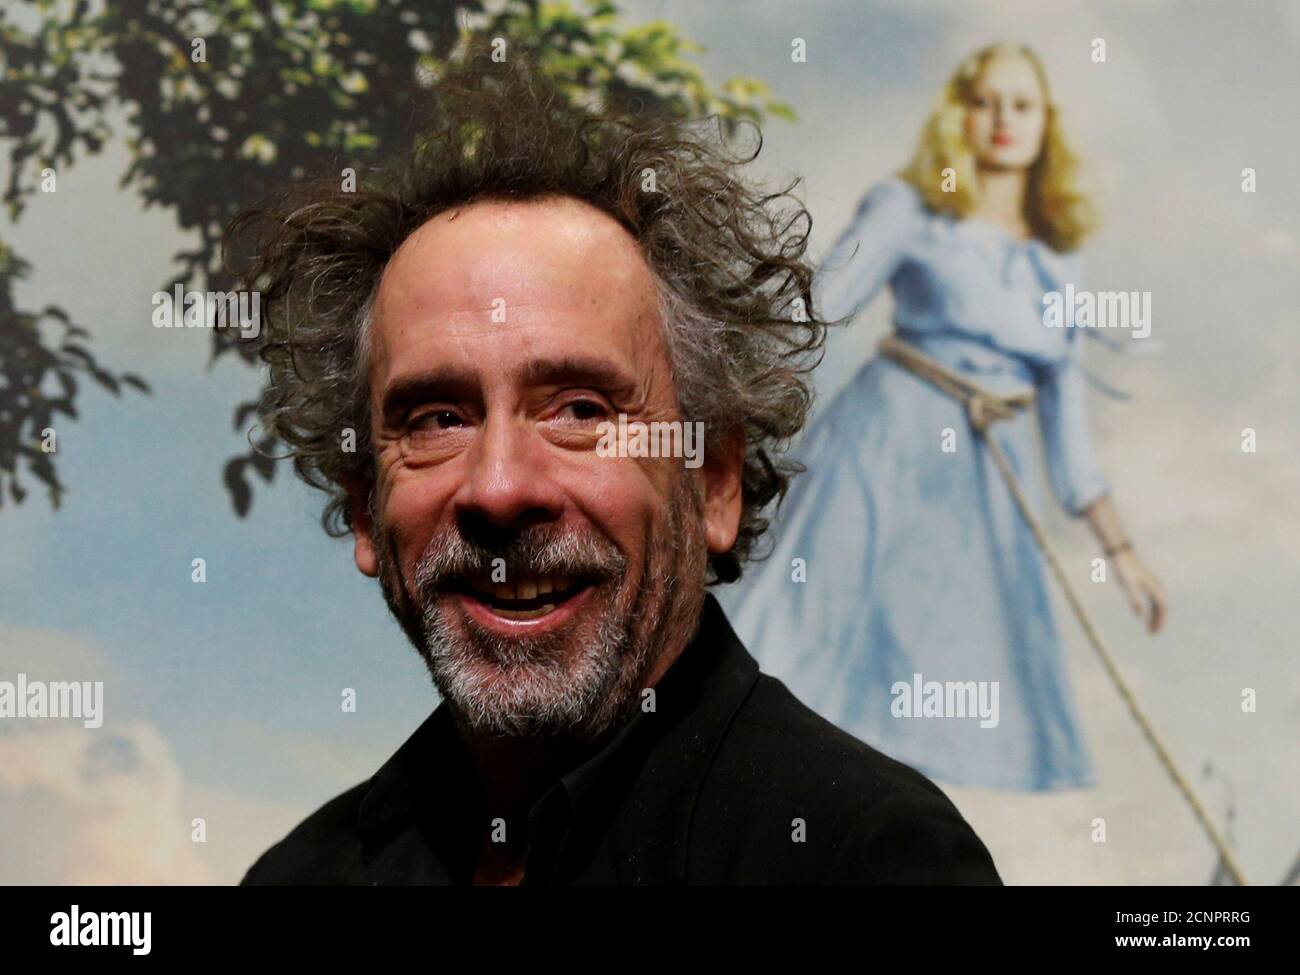 Director Tim Burton attends a news conference to promote his film "Miss  Peregrine's Home for Peculiar Children" in Tokyo, Japan, January 31, 2017.  REUTERS/Toru Hanai Fotografía de stock - Alamy